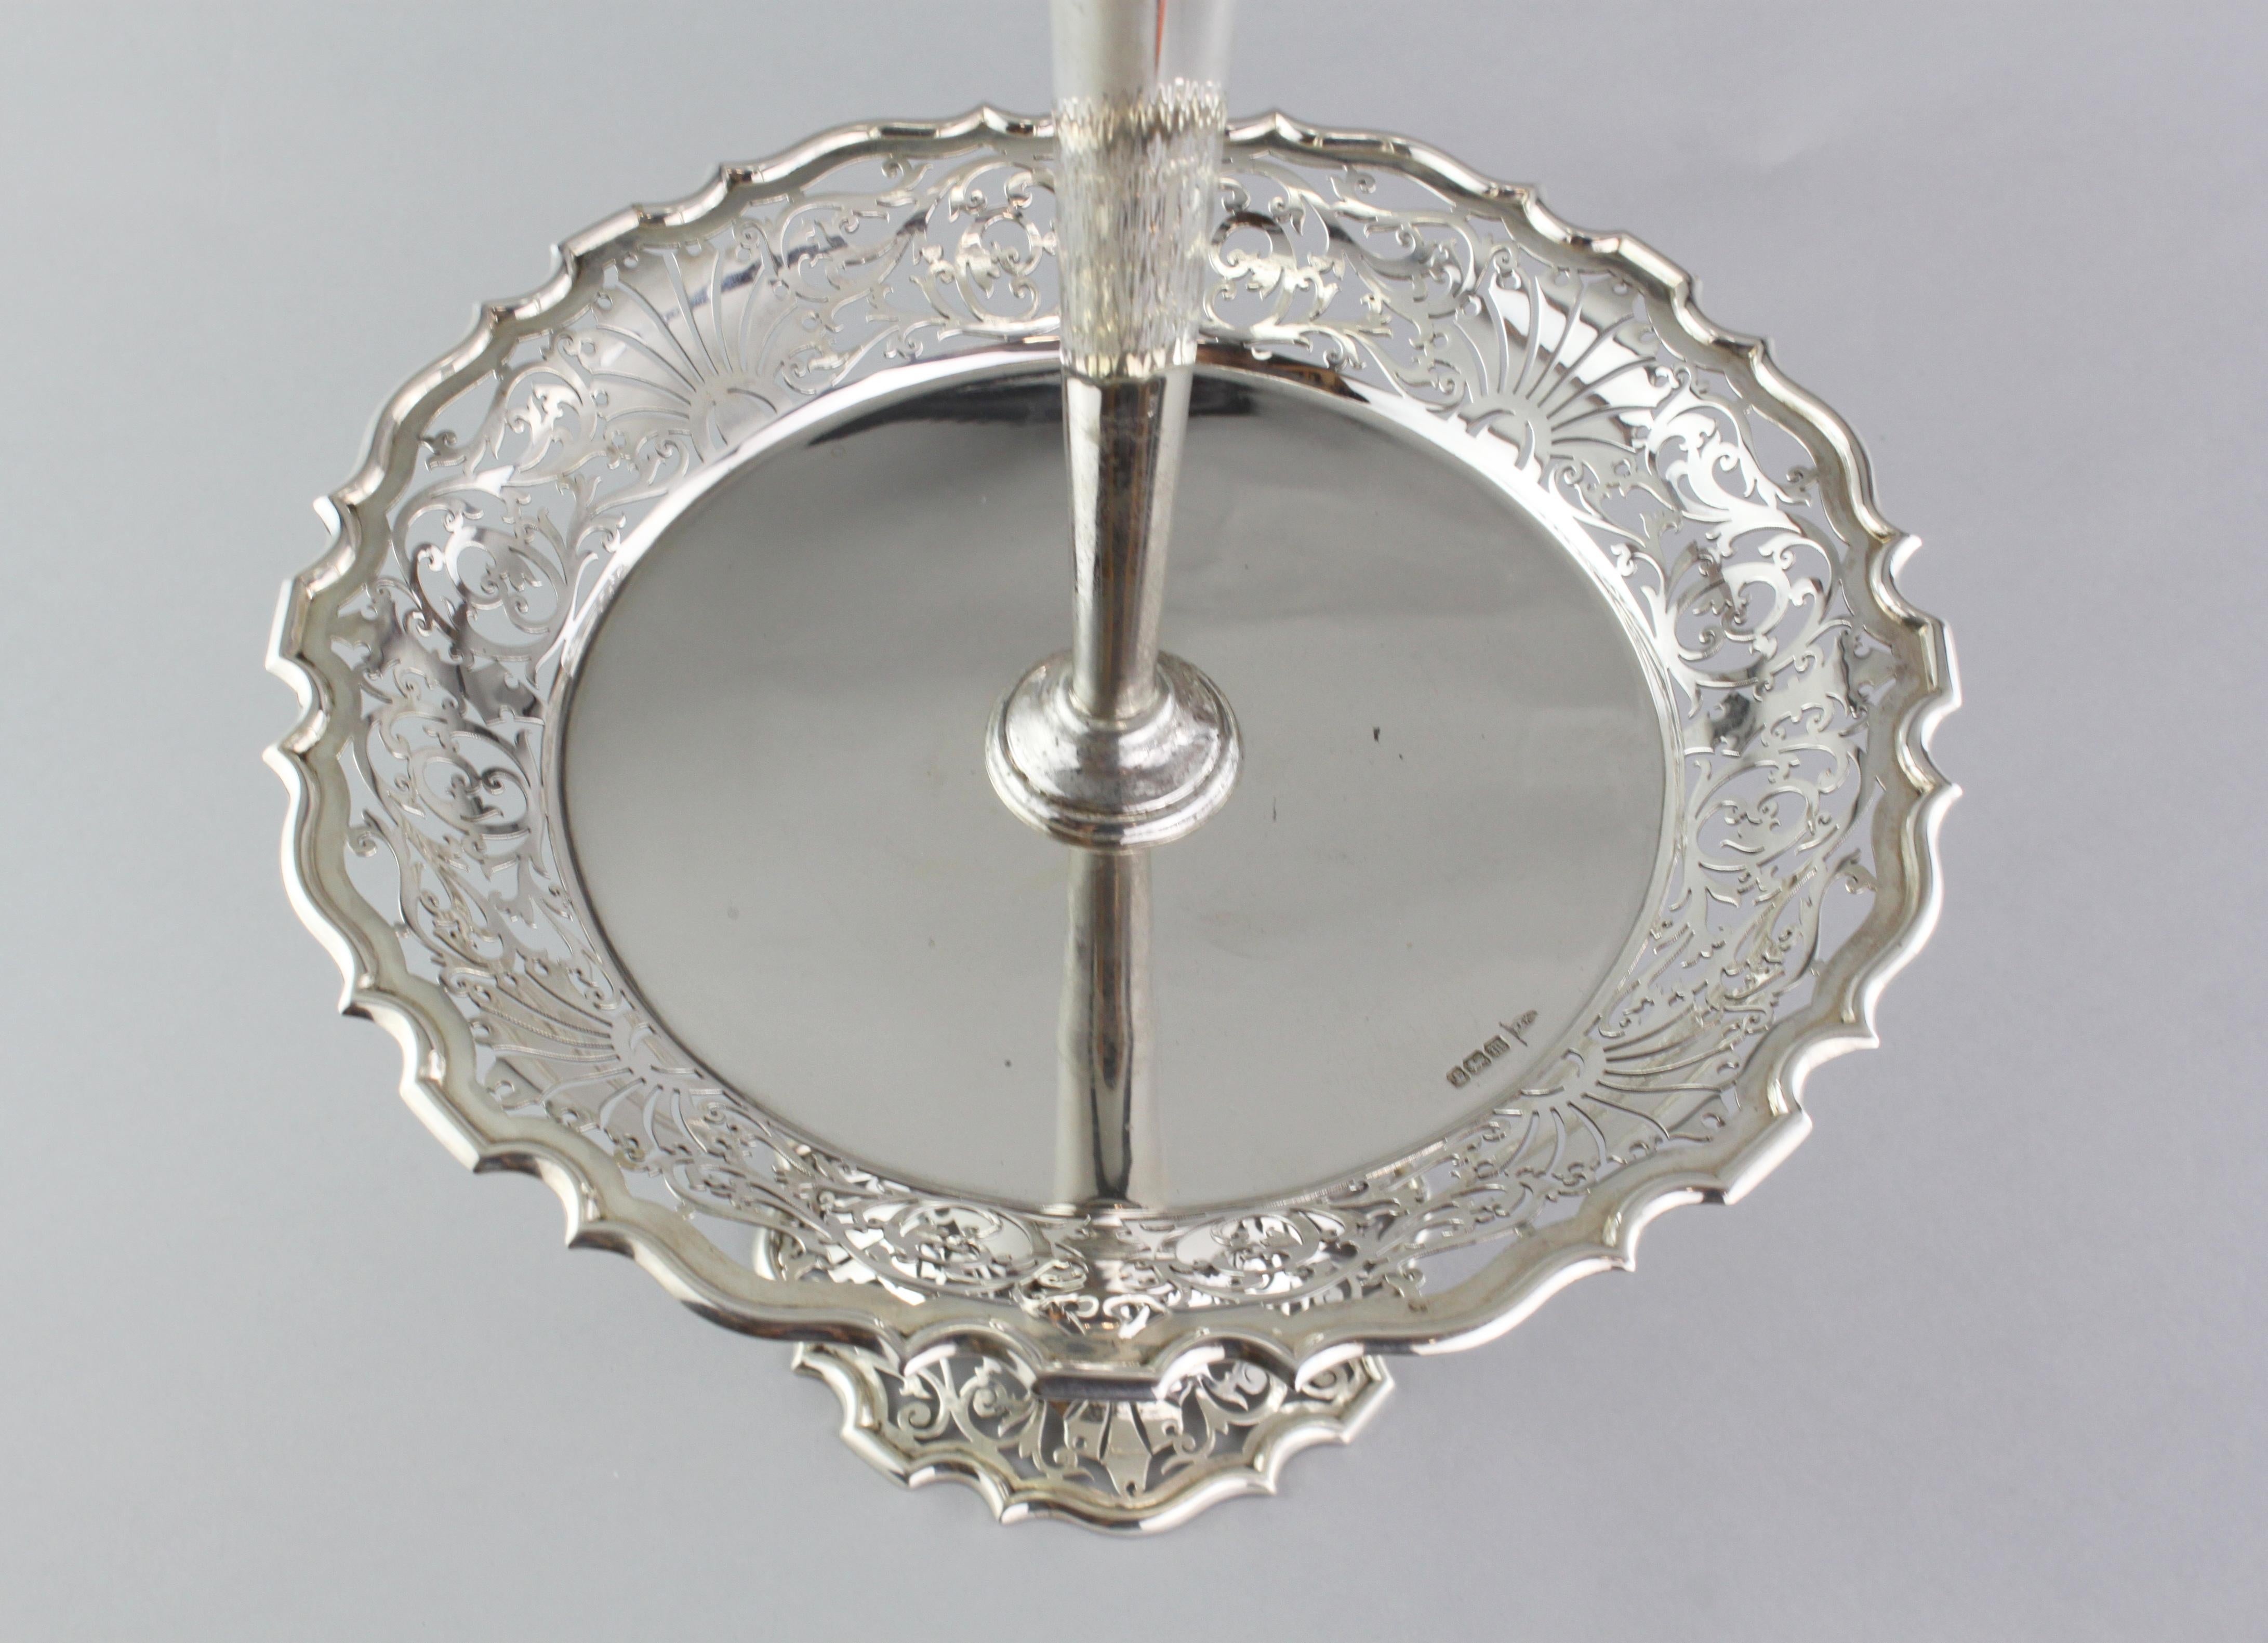 British Antique Sterling Silver Tazza Dish with Vase, Walker & Hall, Sheffield, 1904